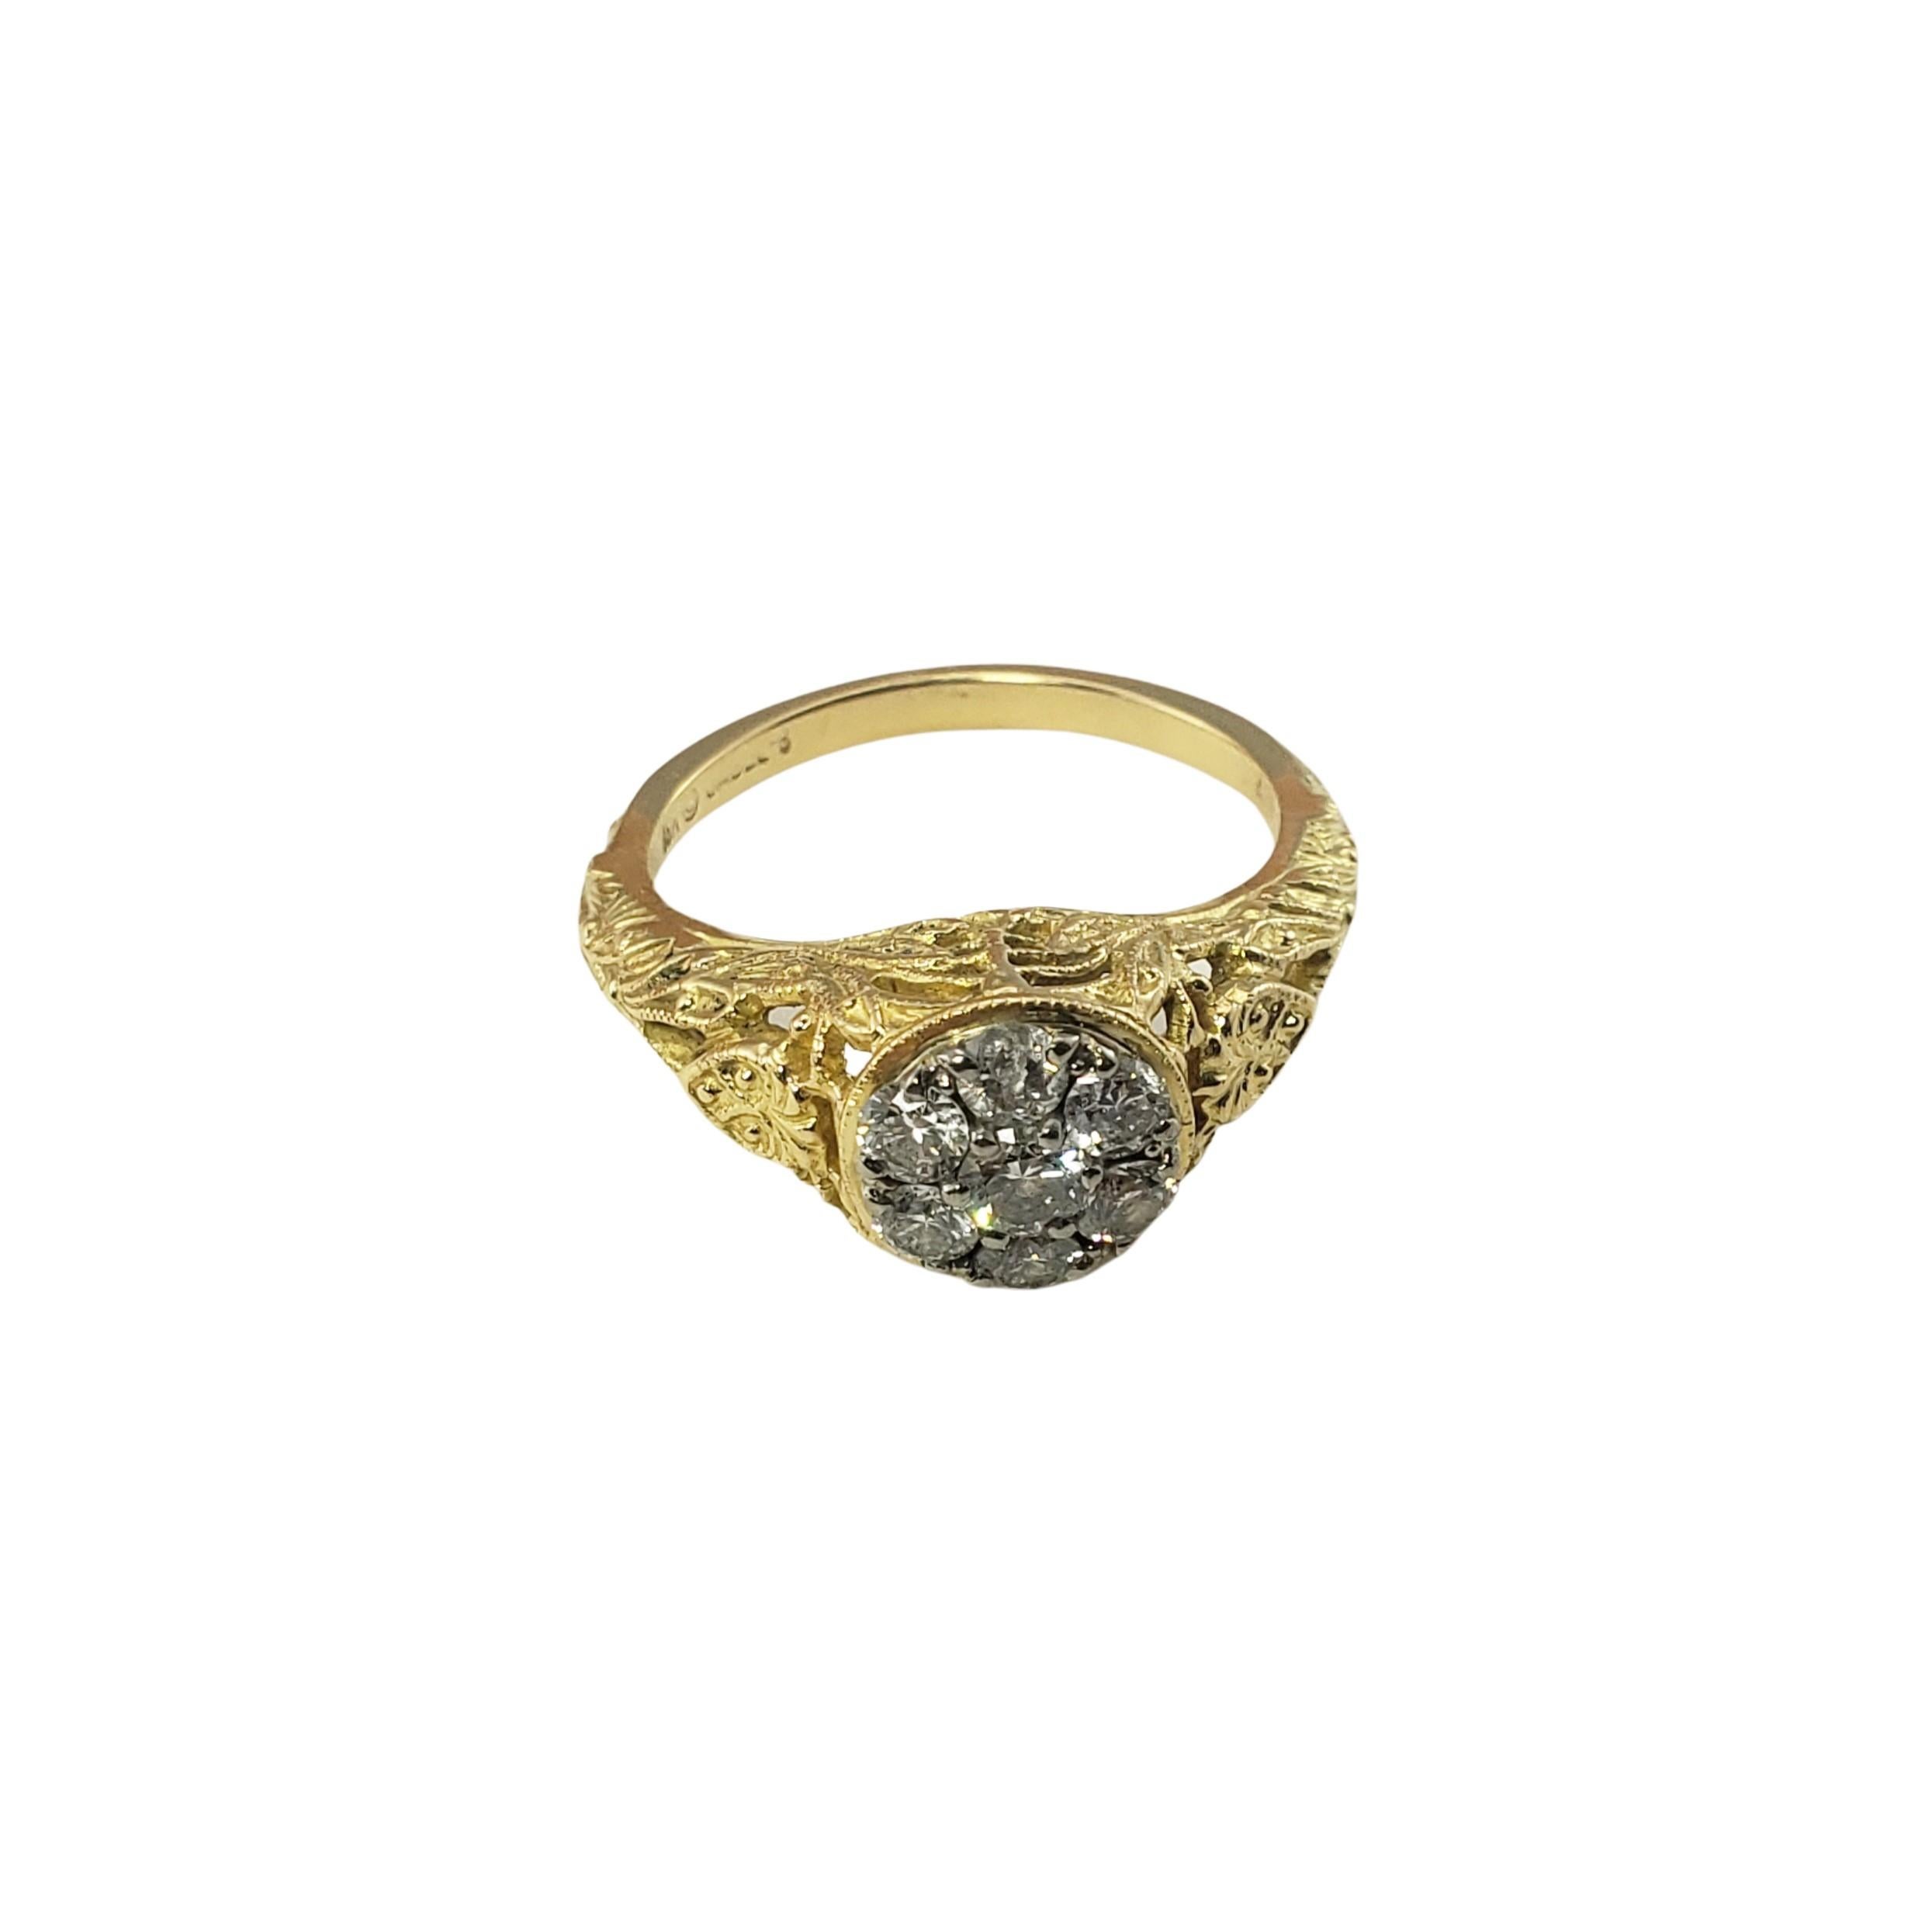 18 Karat Yellow Gold and Diamond Ring Size 5.5-

This sparkling ring features seven round brilliant cut diamonds set in classic 18K yellow gold.  Width:  9 mm.  Shank:  1.5 mm.

Approximate total diamond weight:  .45 ct.

Diamond color: H-I

Diamond